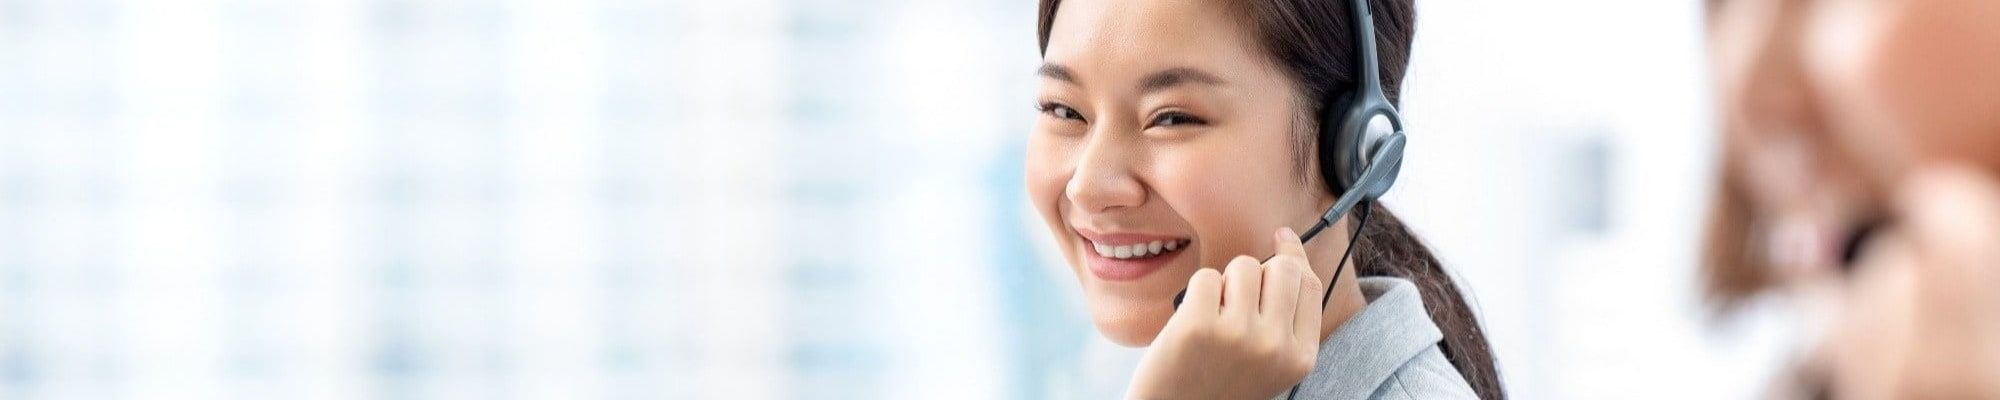 customer support woman smiling in labor consulting services